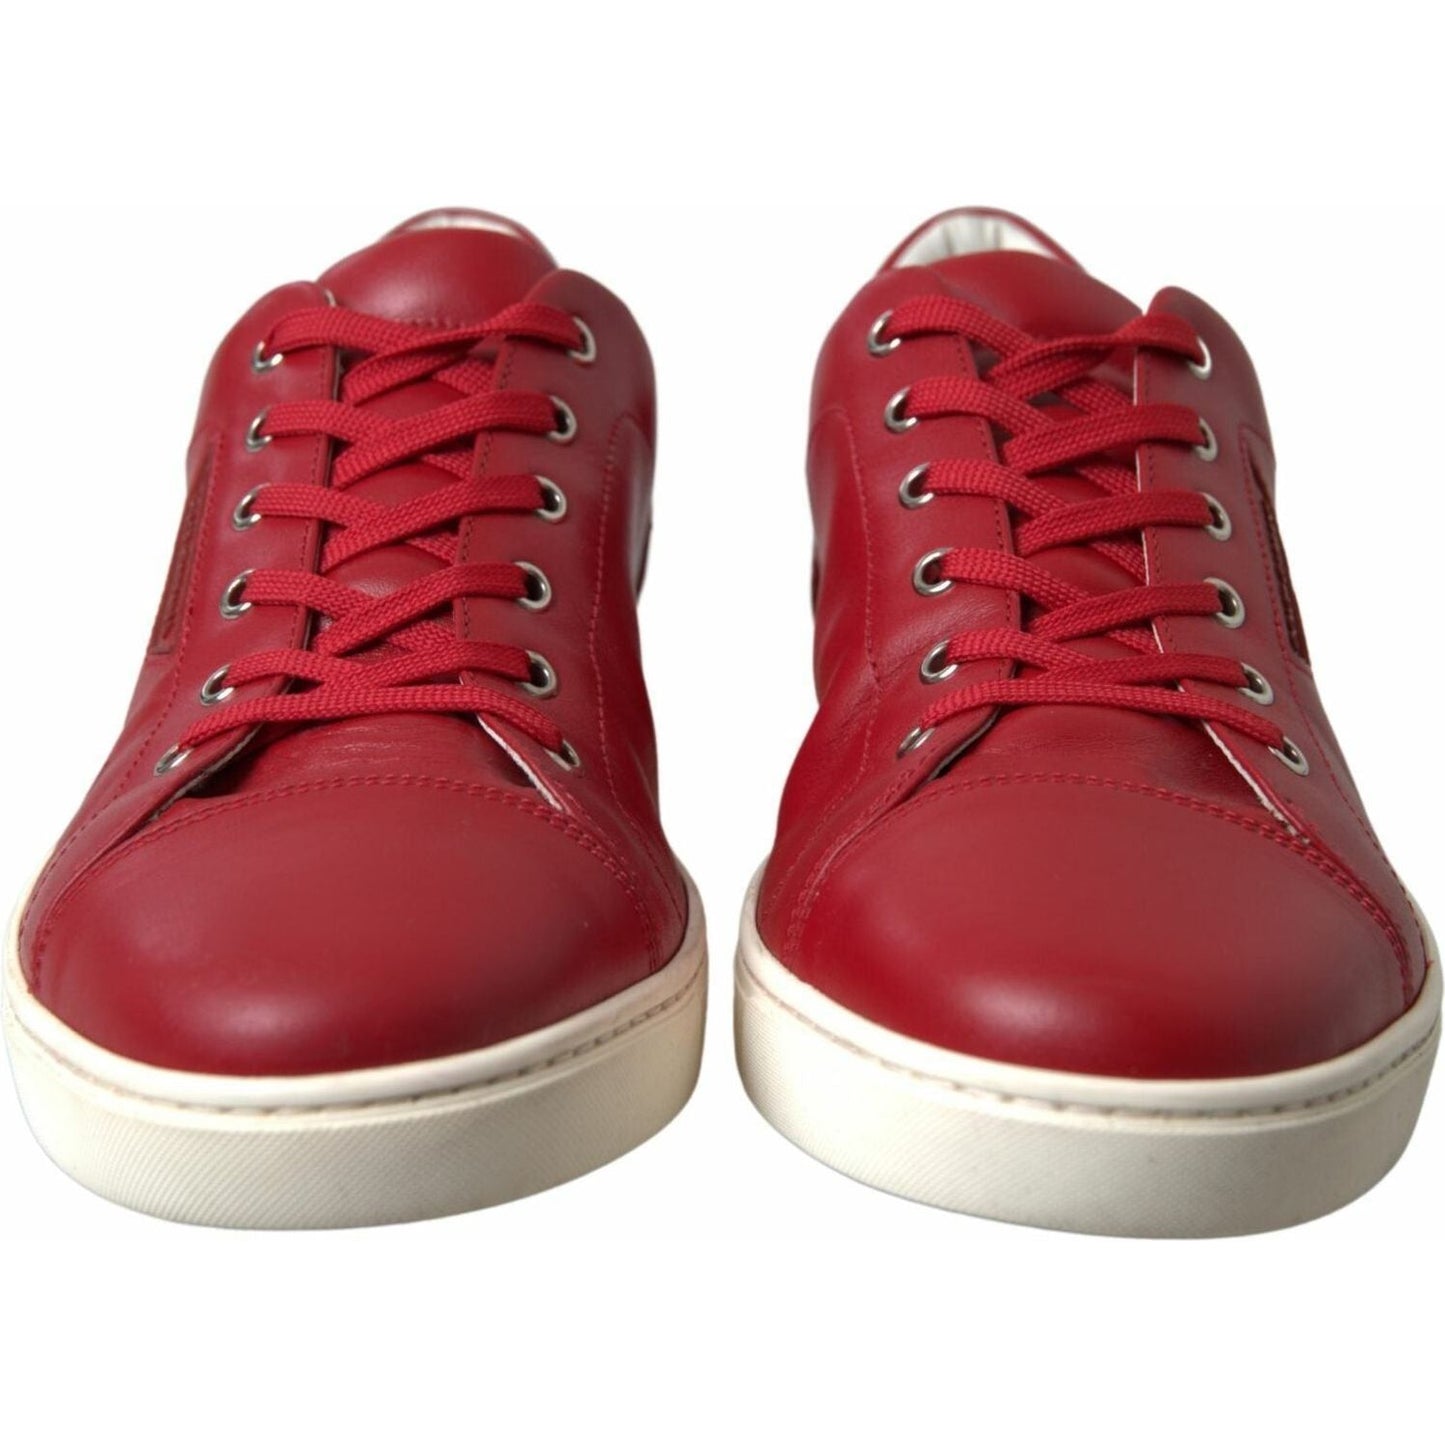 Dolce & Gabbana Elegant Red Leather Low Top Sneakers shoes-red-portofino-leather-low-top-mens-sneakers